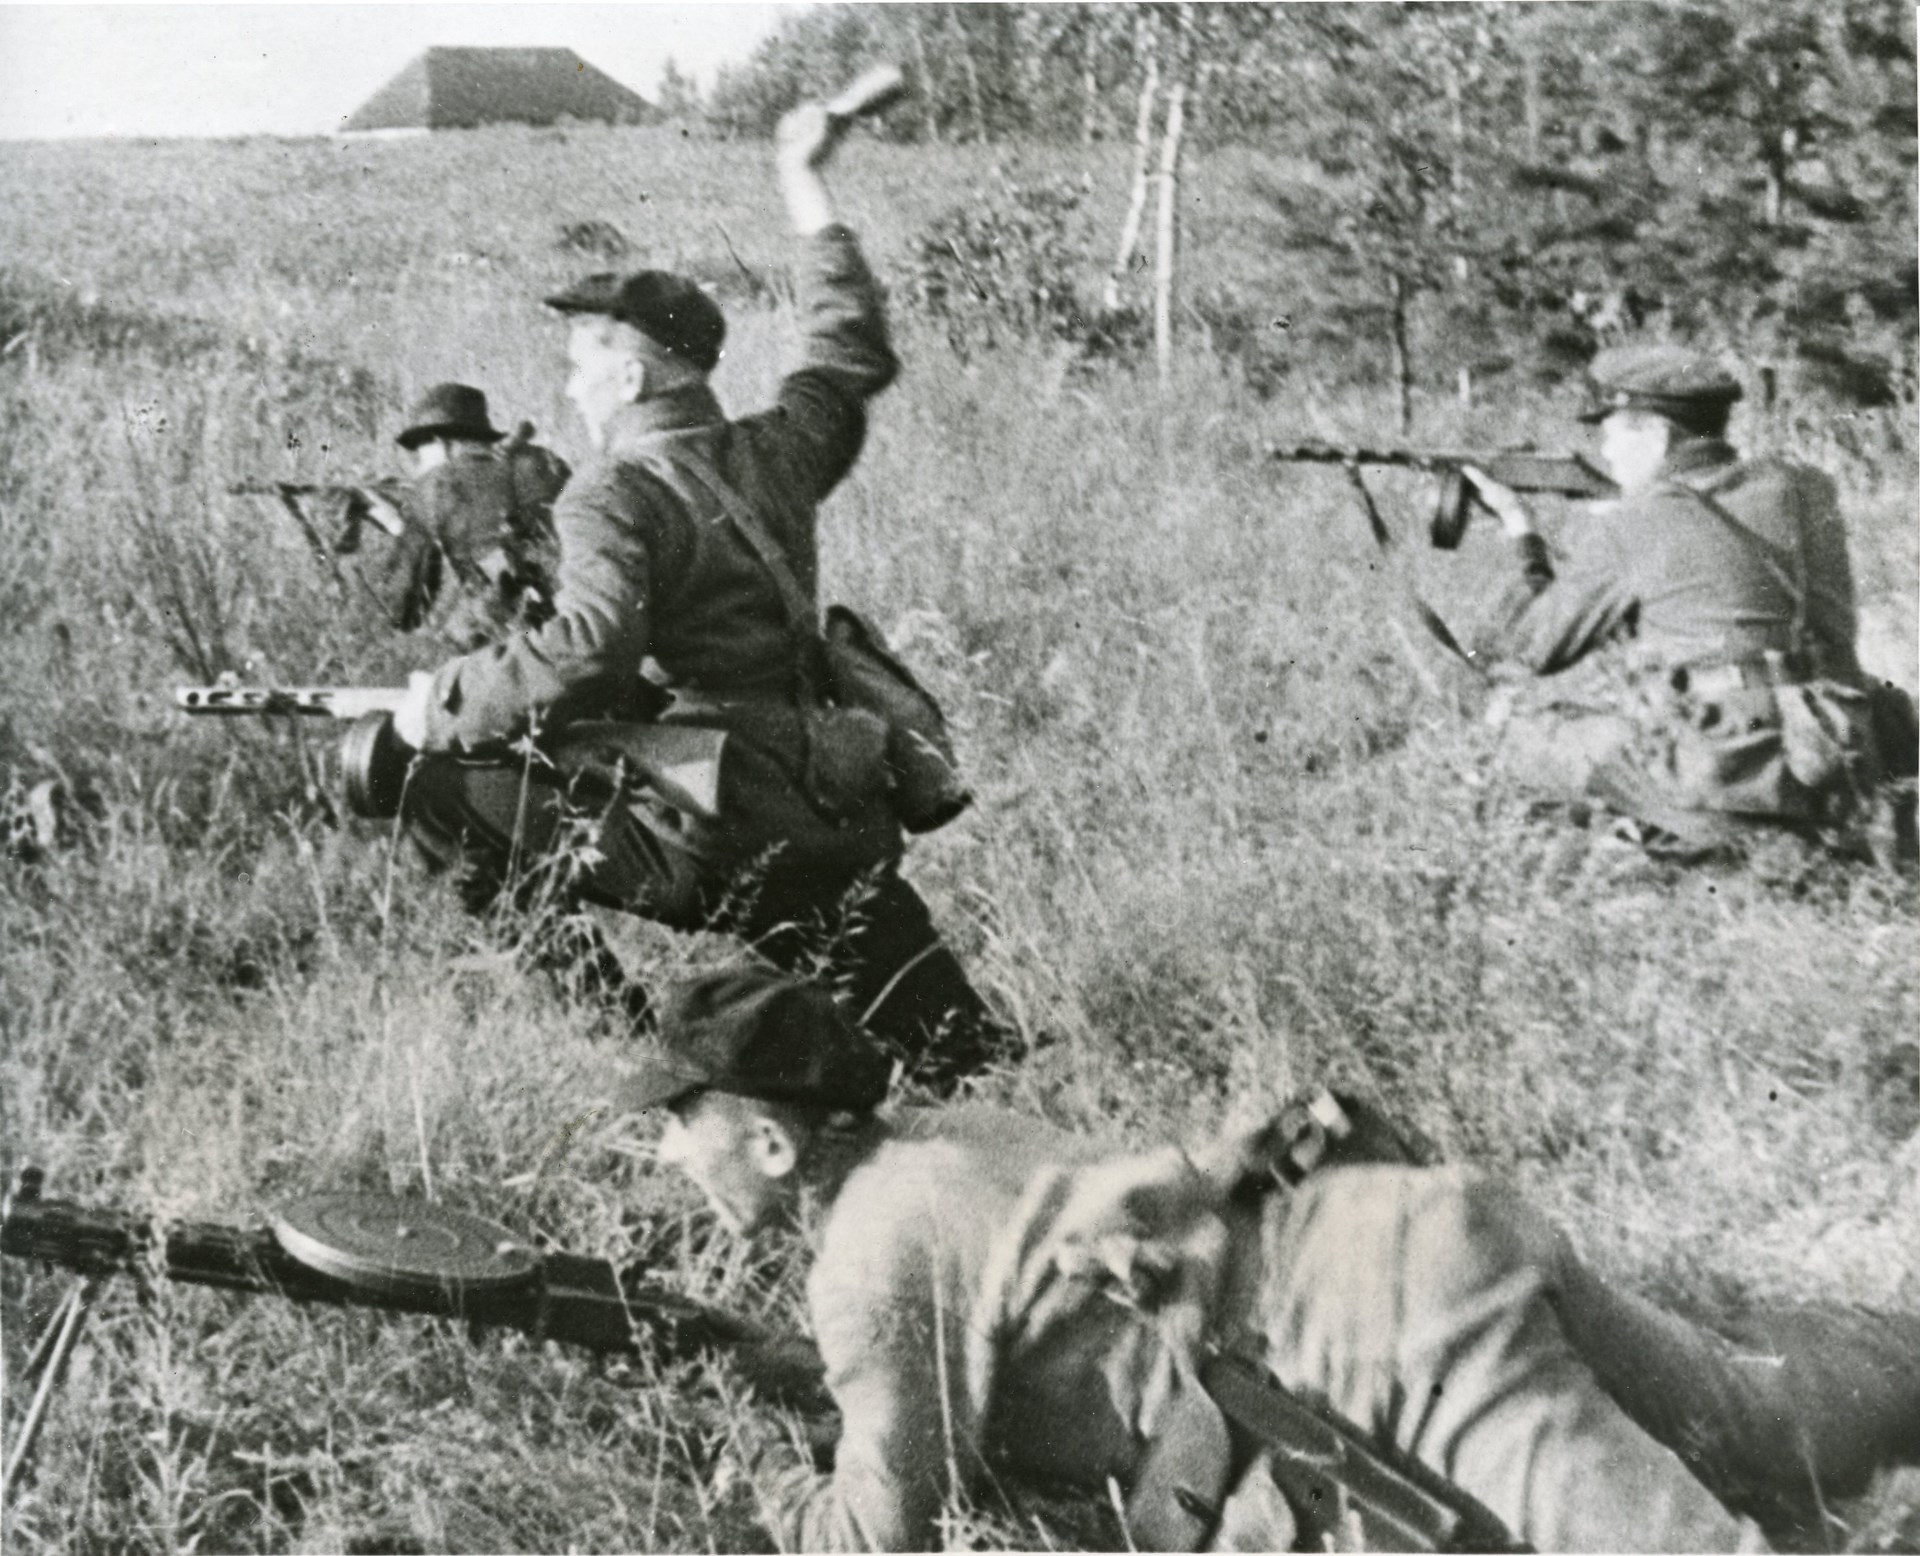 Soviet partisans with a DP-27 LMG and the ubiquitous PPSh-41 SMG. Author's collection